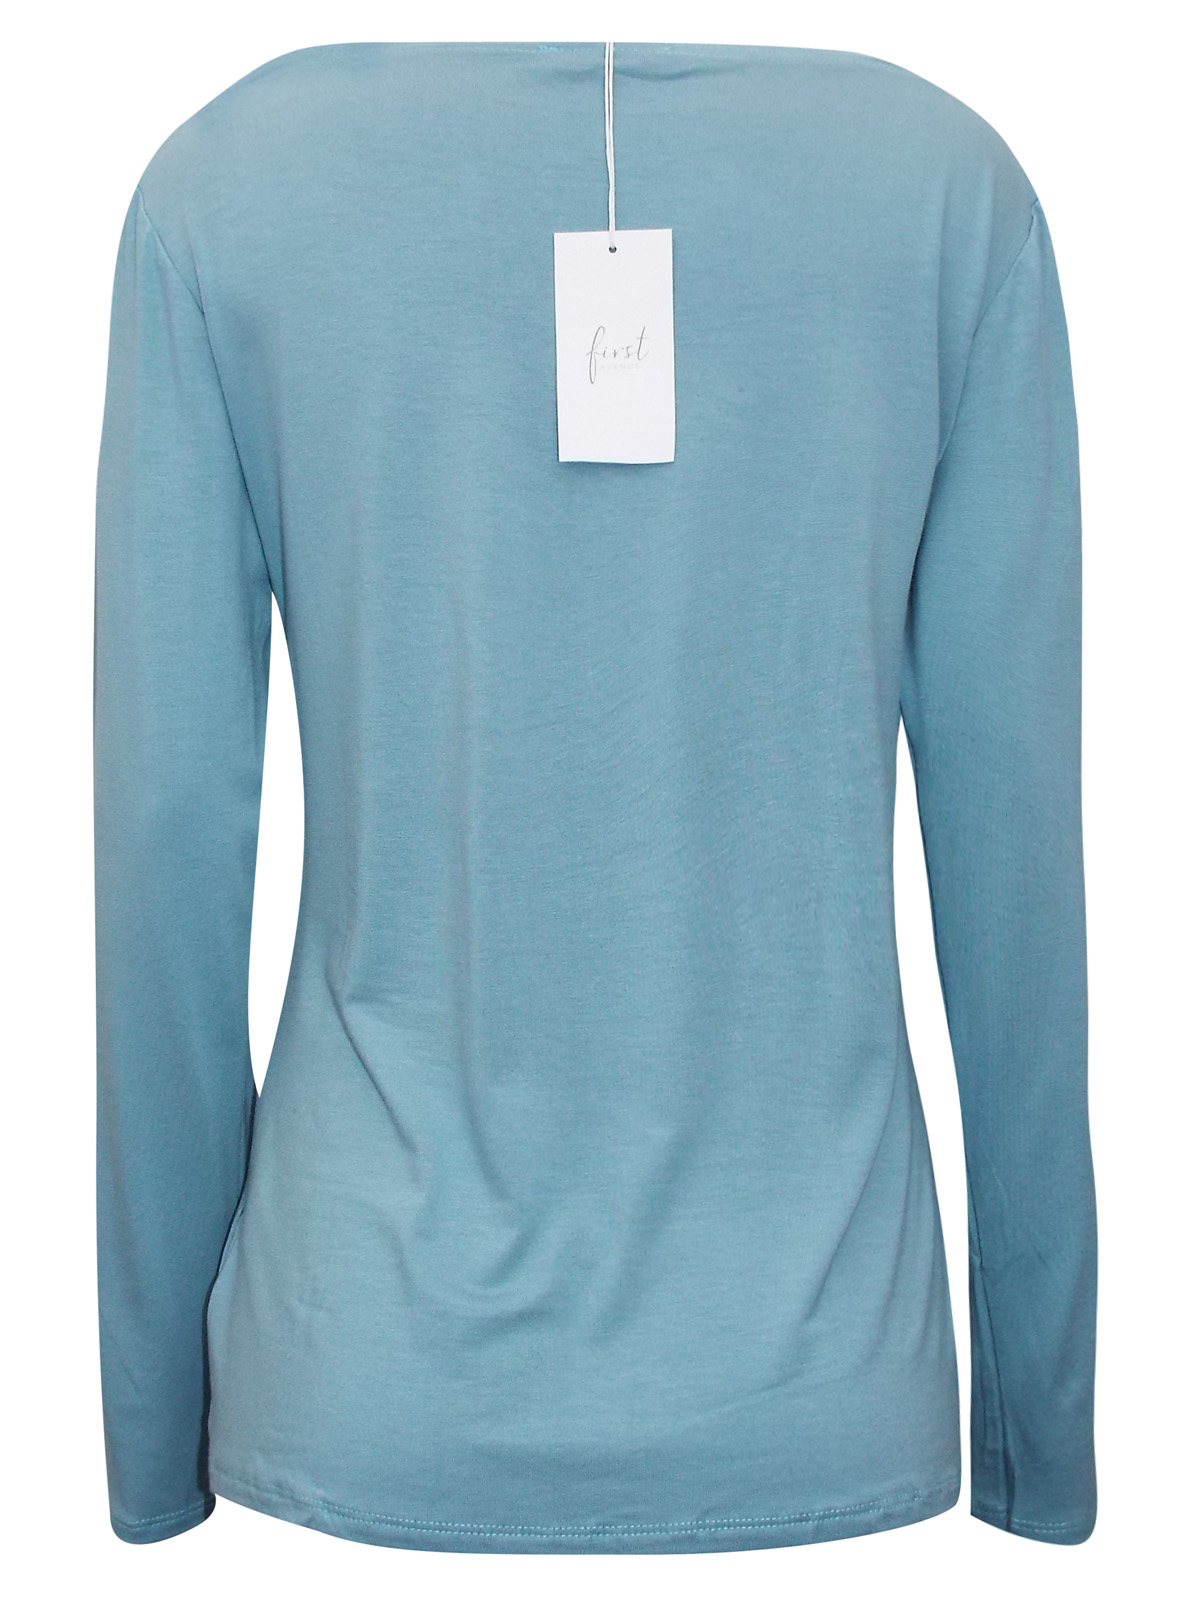 First Avenue PALE-TEAL Slash Neck Long Sleeve Jersey Top - Size 12 to 20